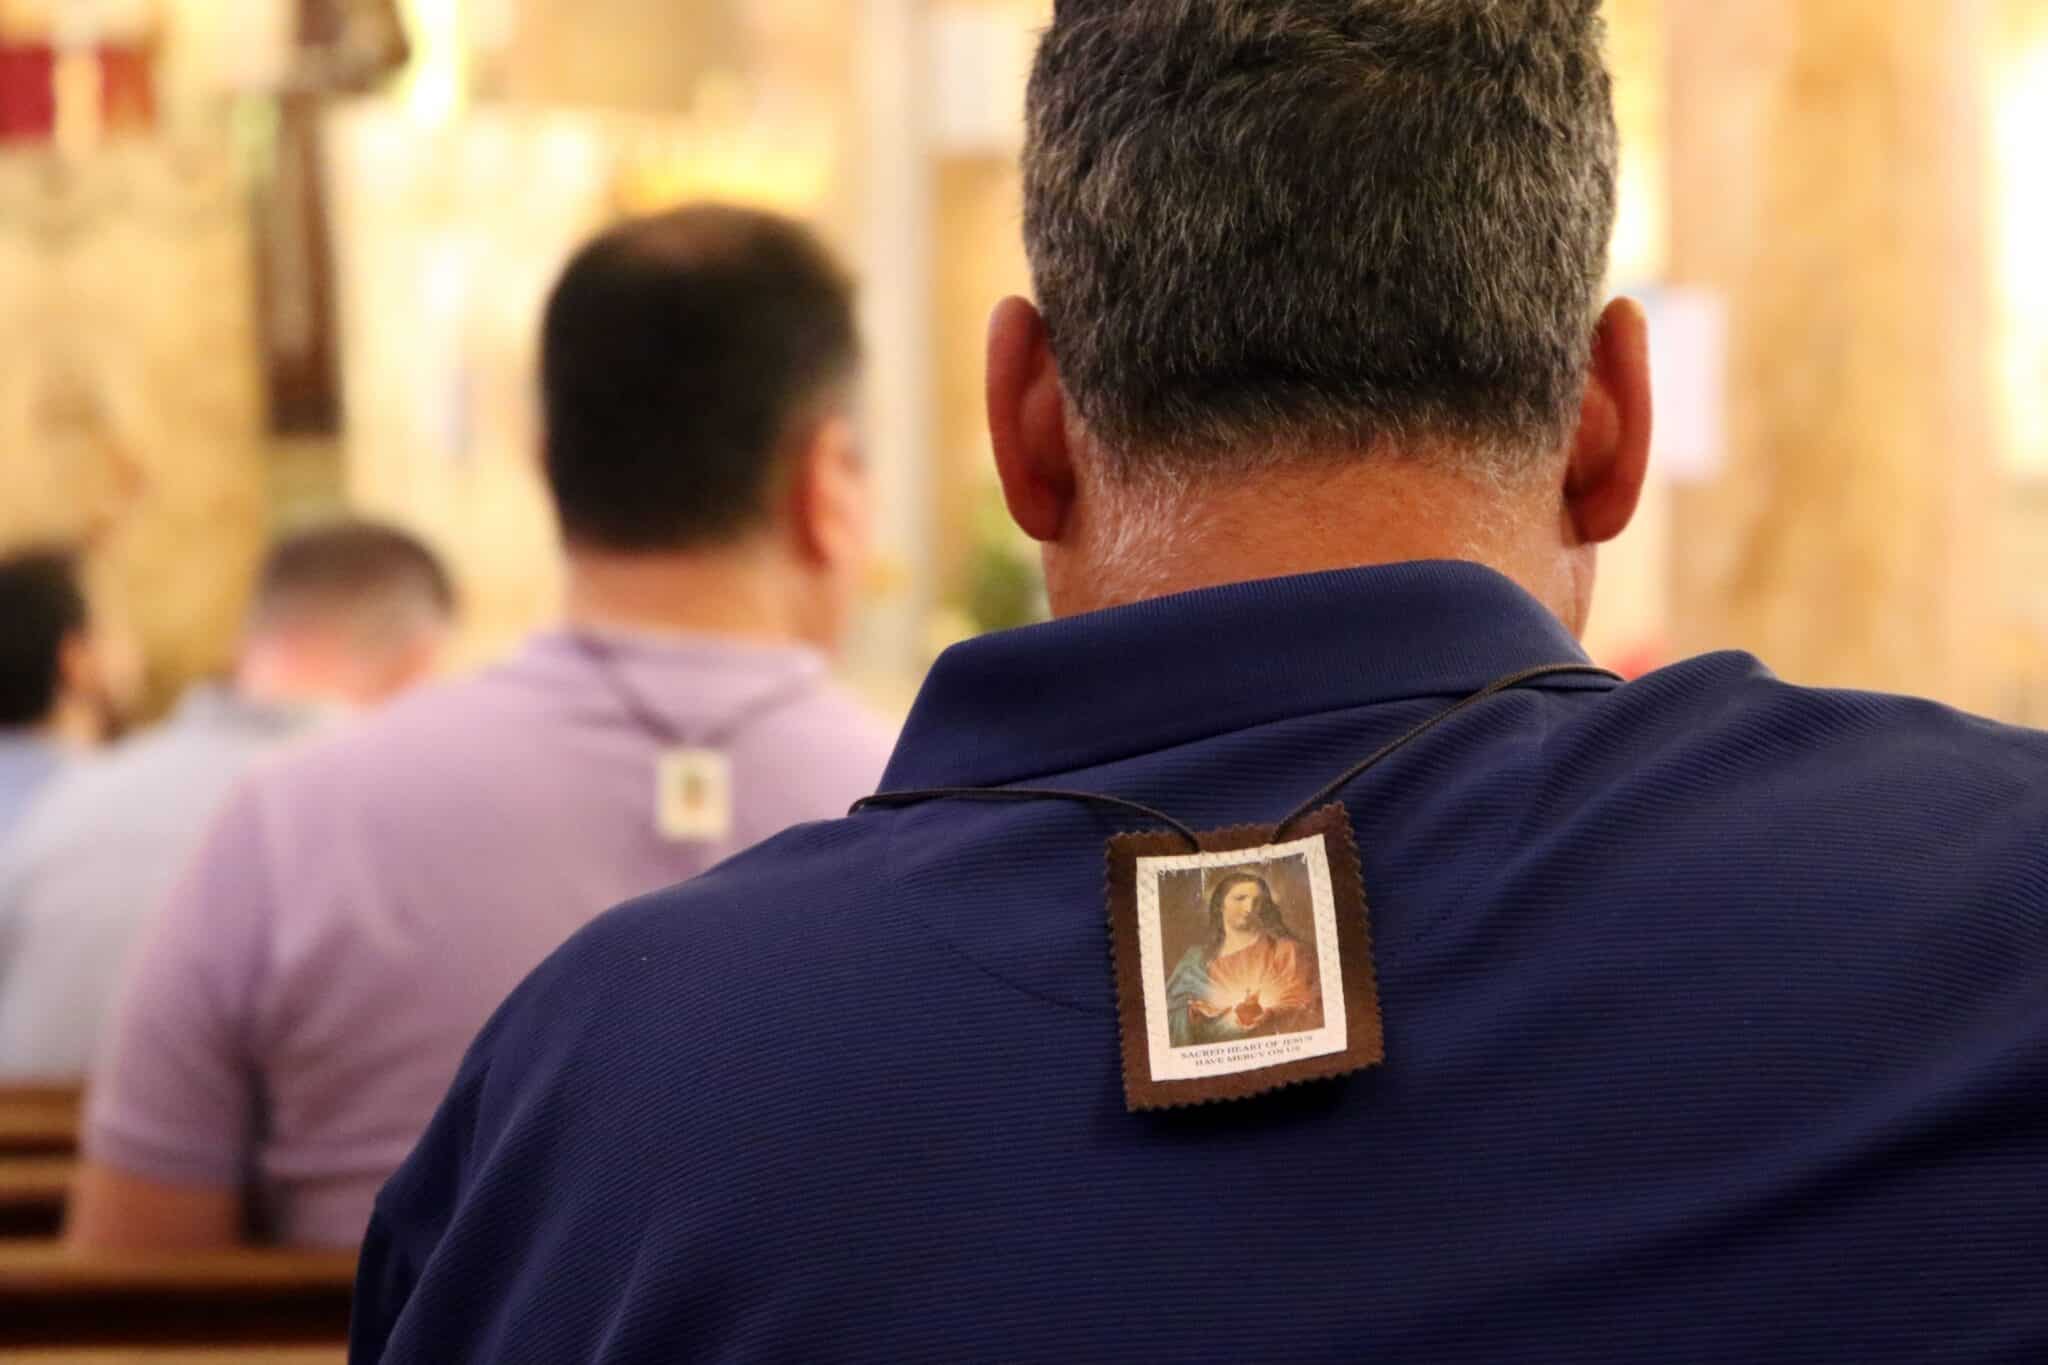 Men are seen wearing scapulars during a Mass July 16 marking the feast of Our Lady of Mount Carmel at the Pontifical Shrine of Our Lady of Mount Carmel in East Harlem, N.Y. Founded in 1884 to serve Italian immigrants, the parish now ministers to a congregation comprised primarily of people of Haitian and Latino ancestry. (CNS photo/Gregory A. Shemitz)